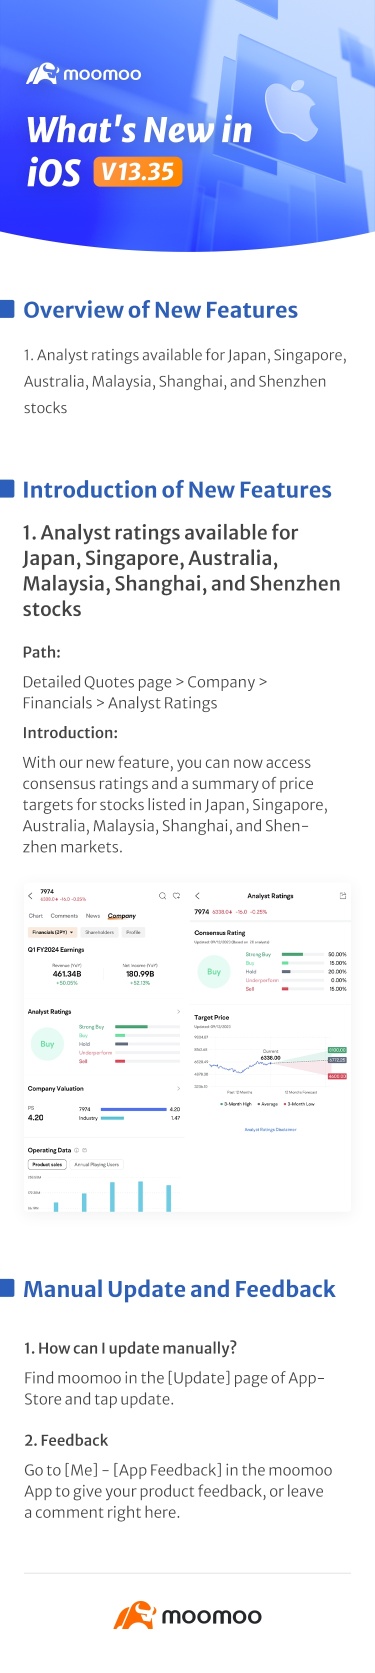 What's New: Analyst ratings available for Japan, Singapore, Australia, etc. in iOS v13.35